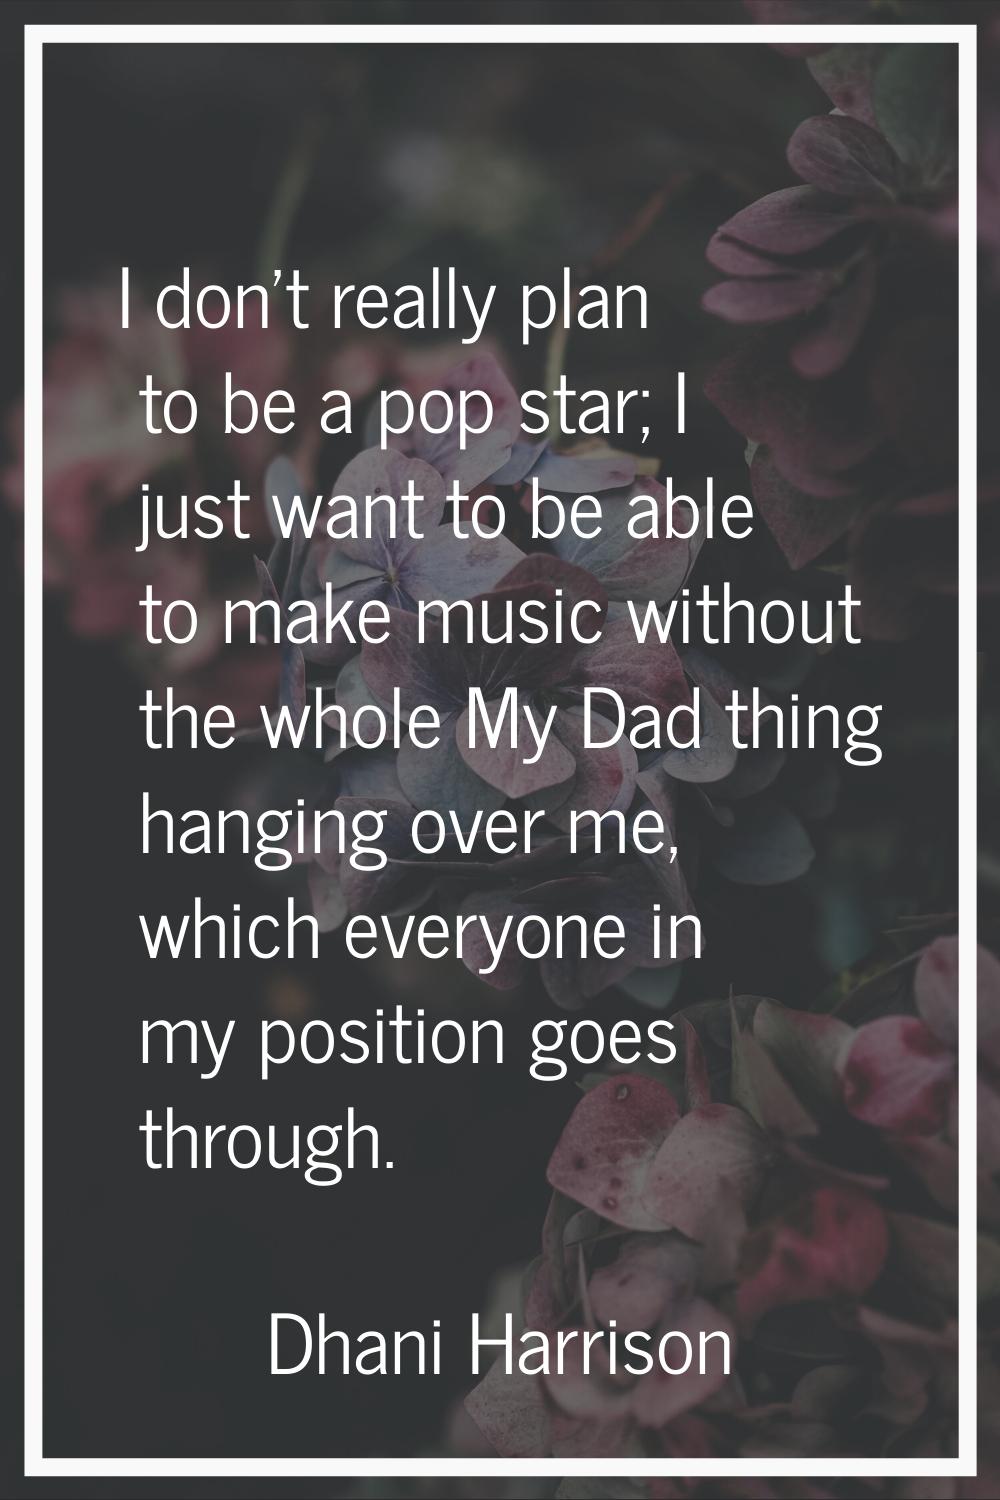 I don't really plan to be a pop star; I just want to be able to make music without the whole My Dad